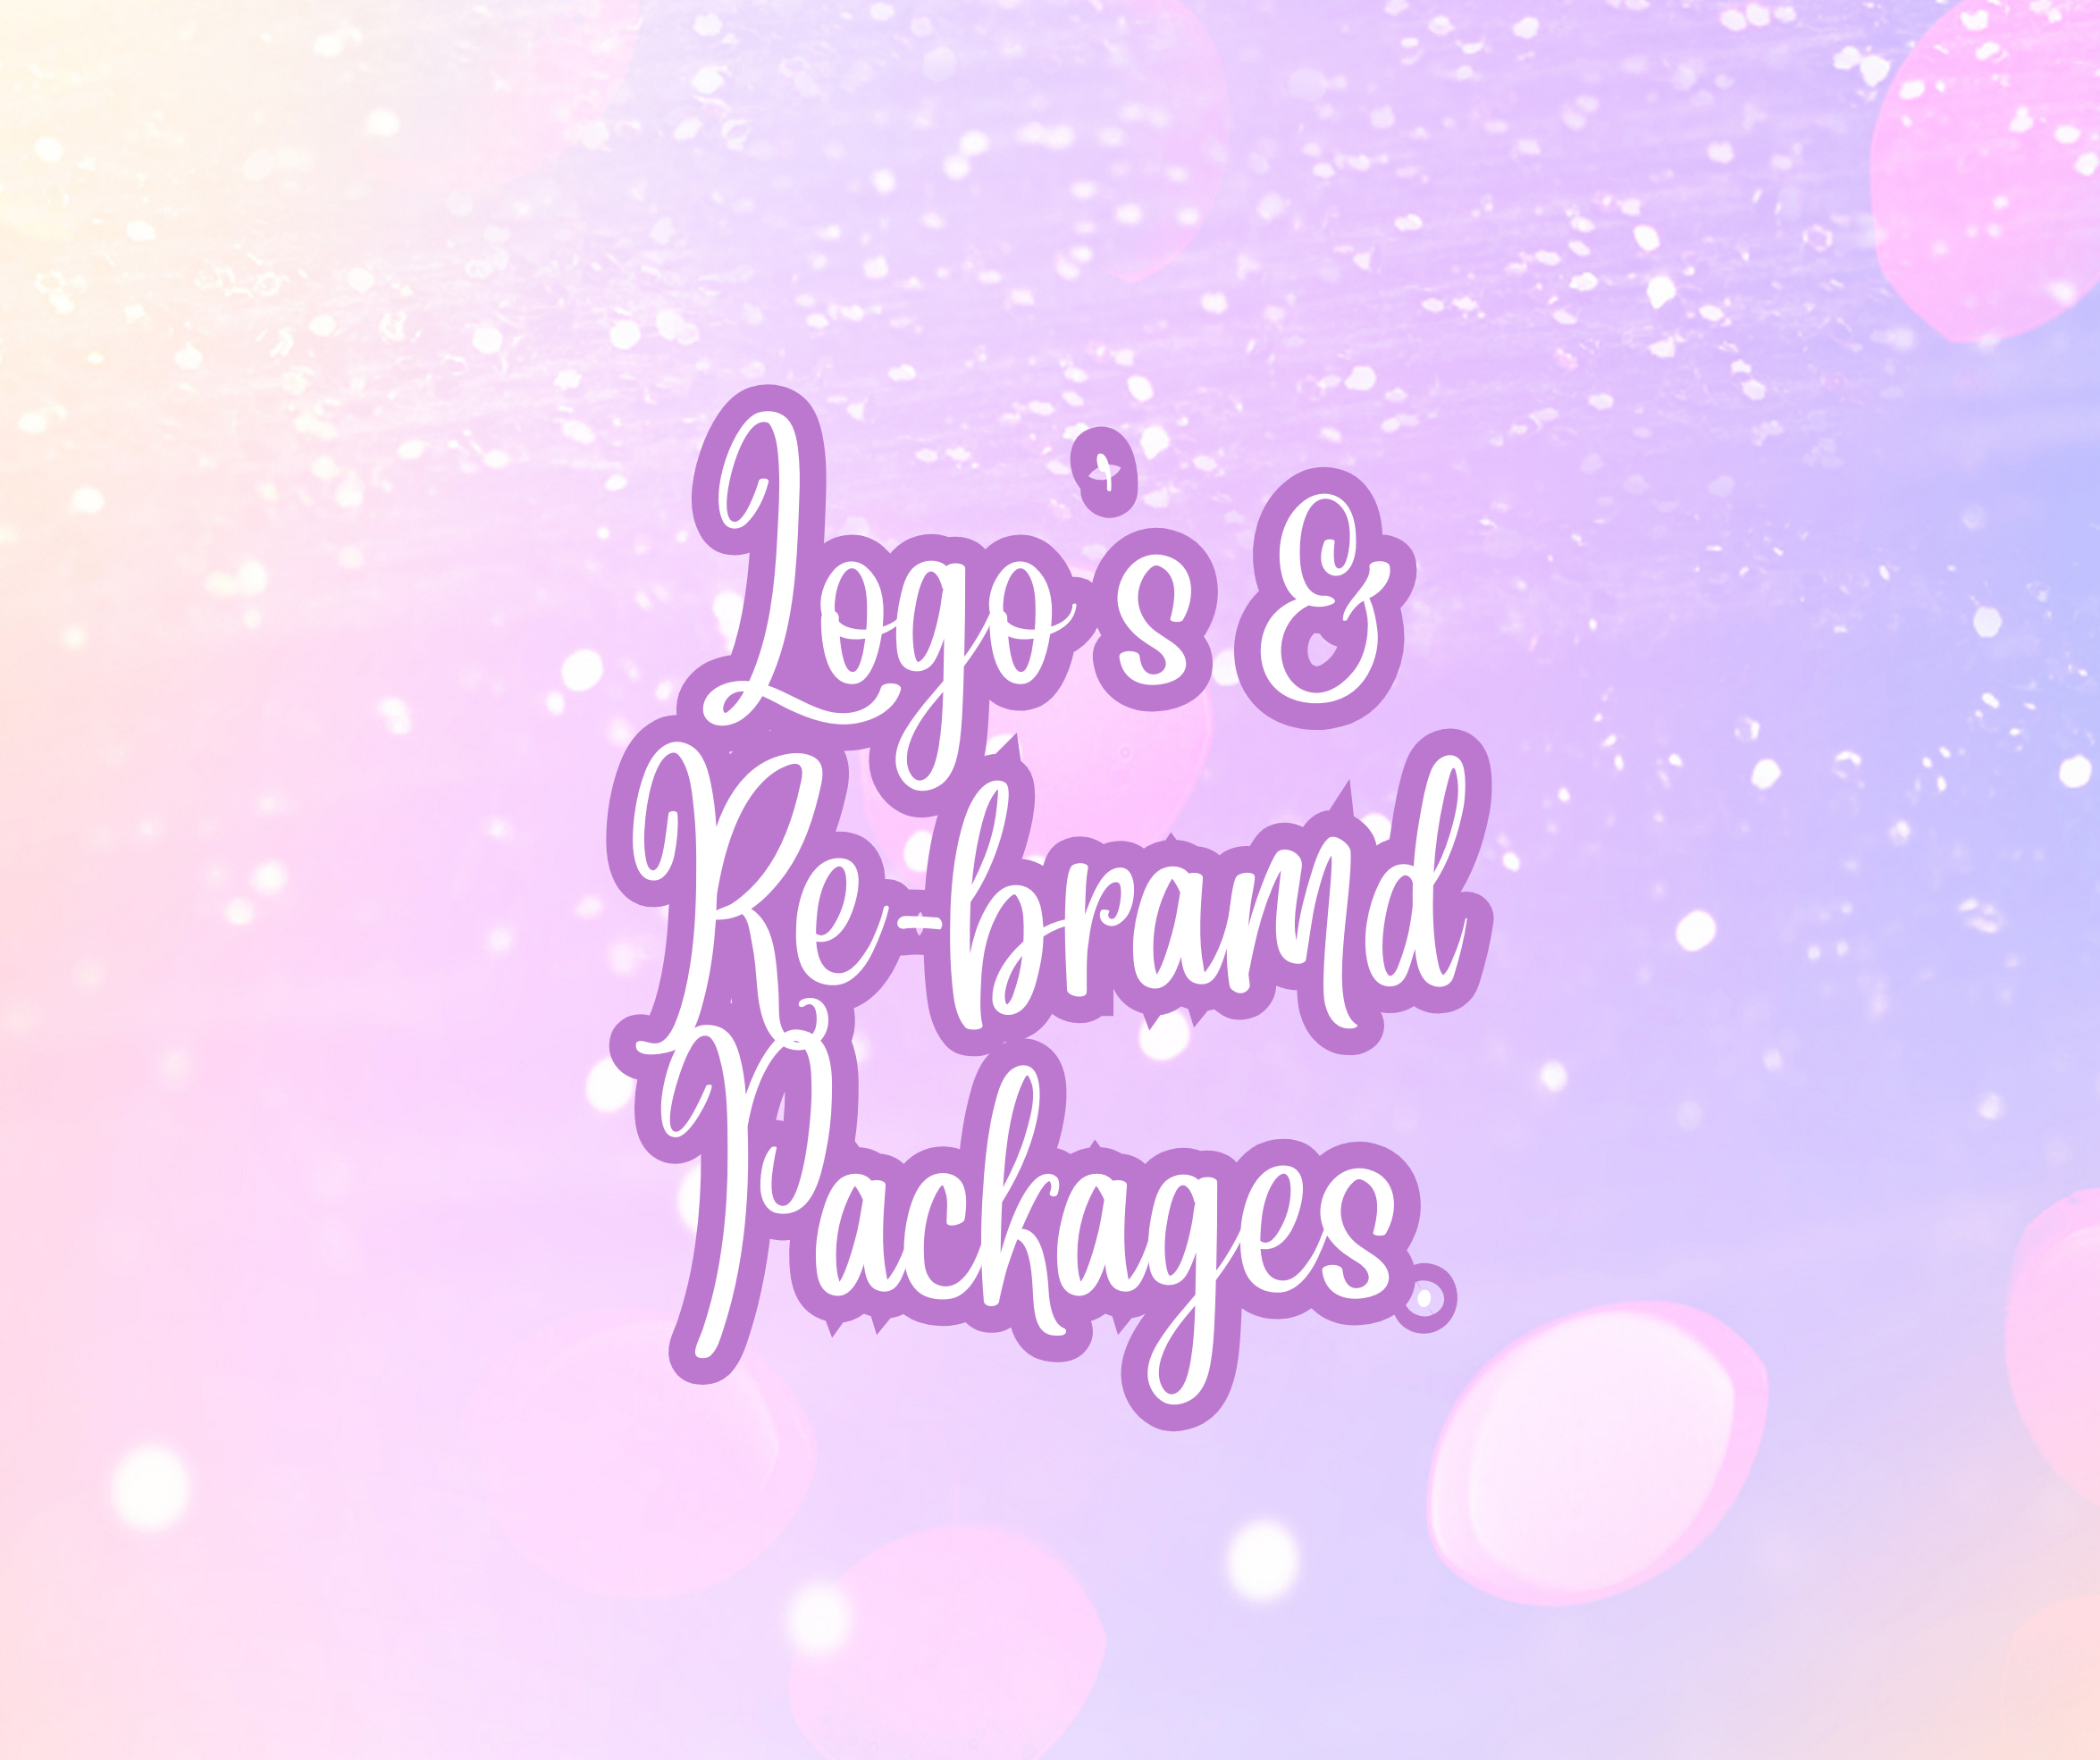 Logo's & Re-brand Packages